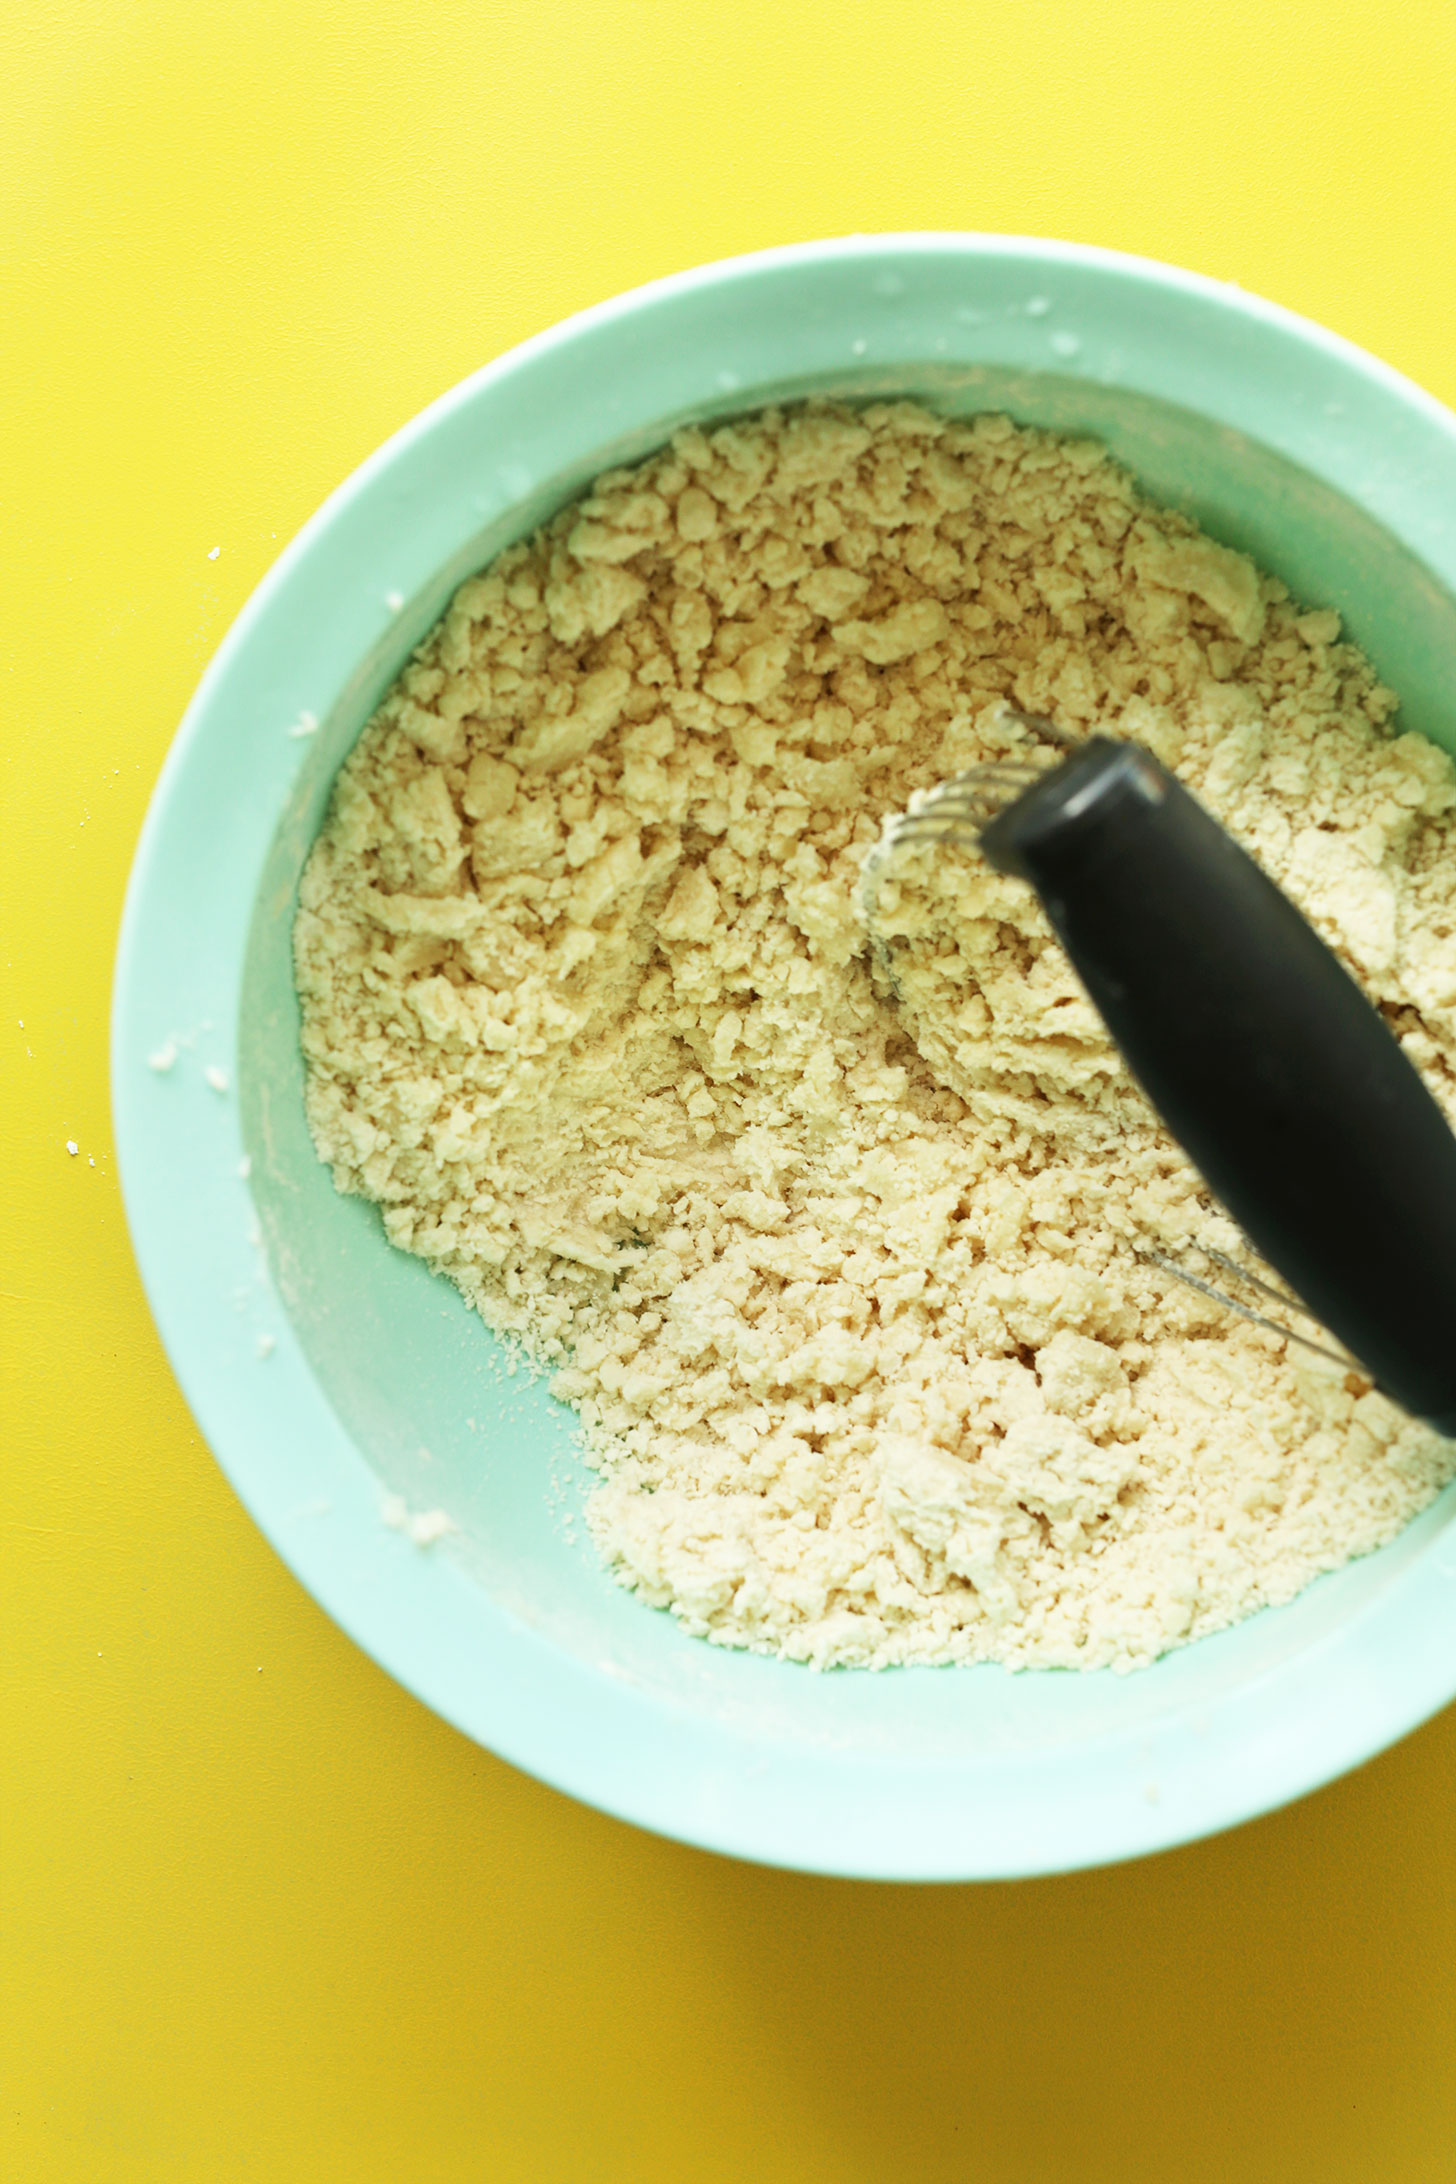 Using a pastry cutter to cut coconut oil into other crust ingredients